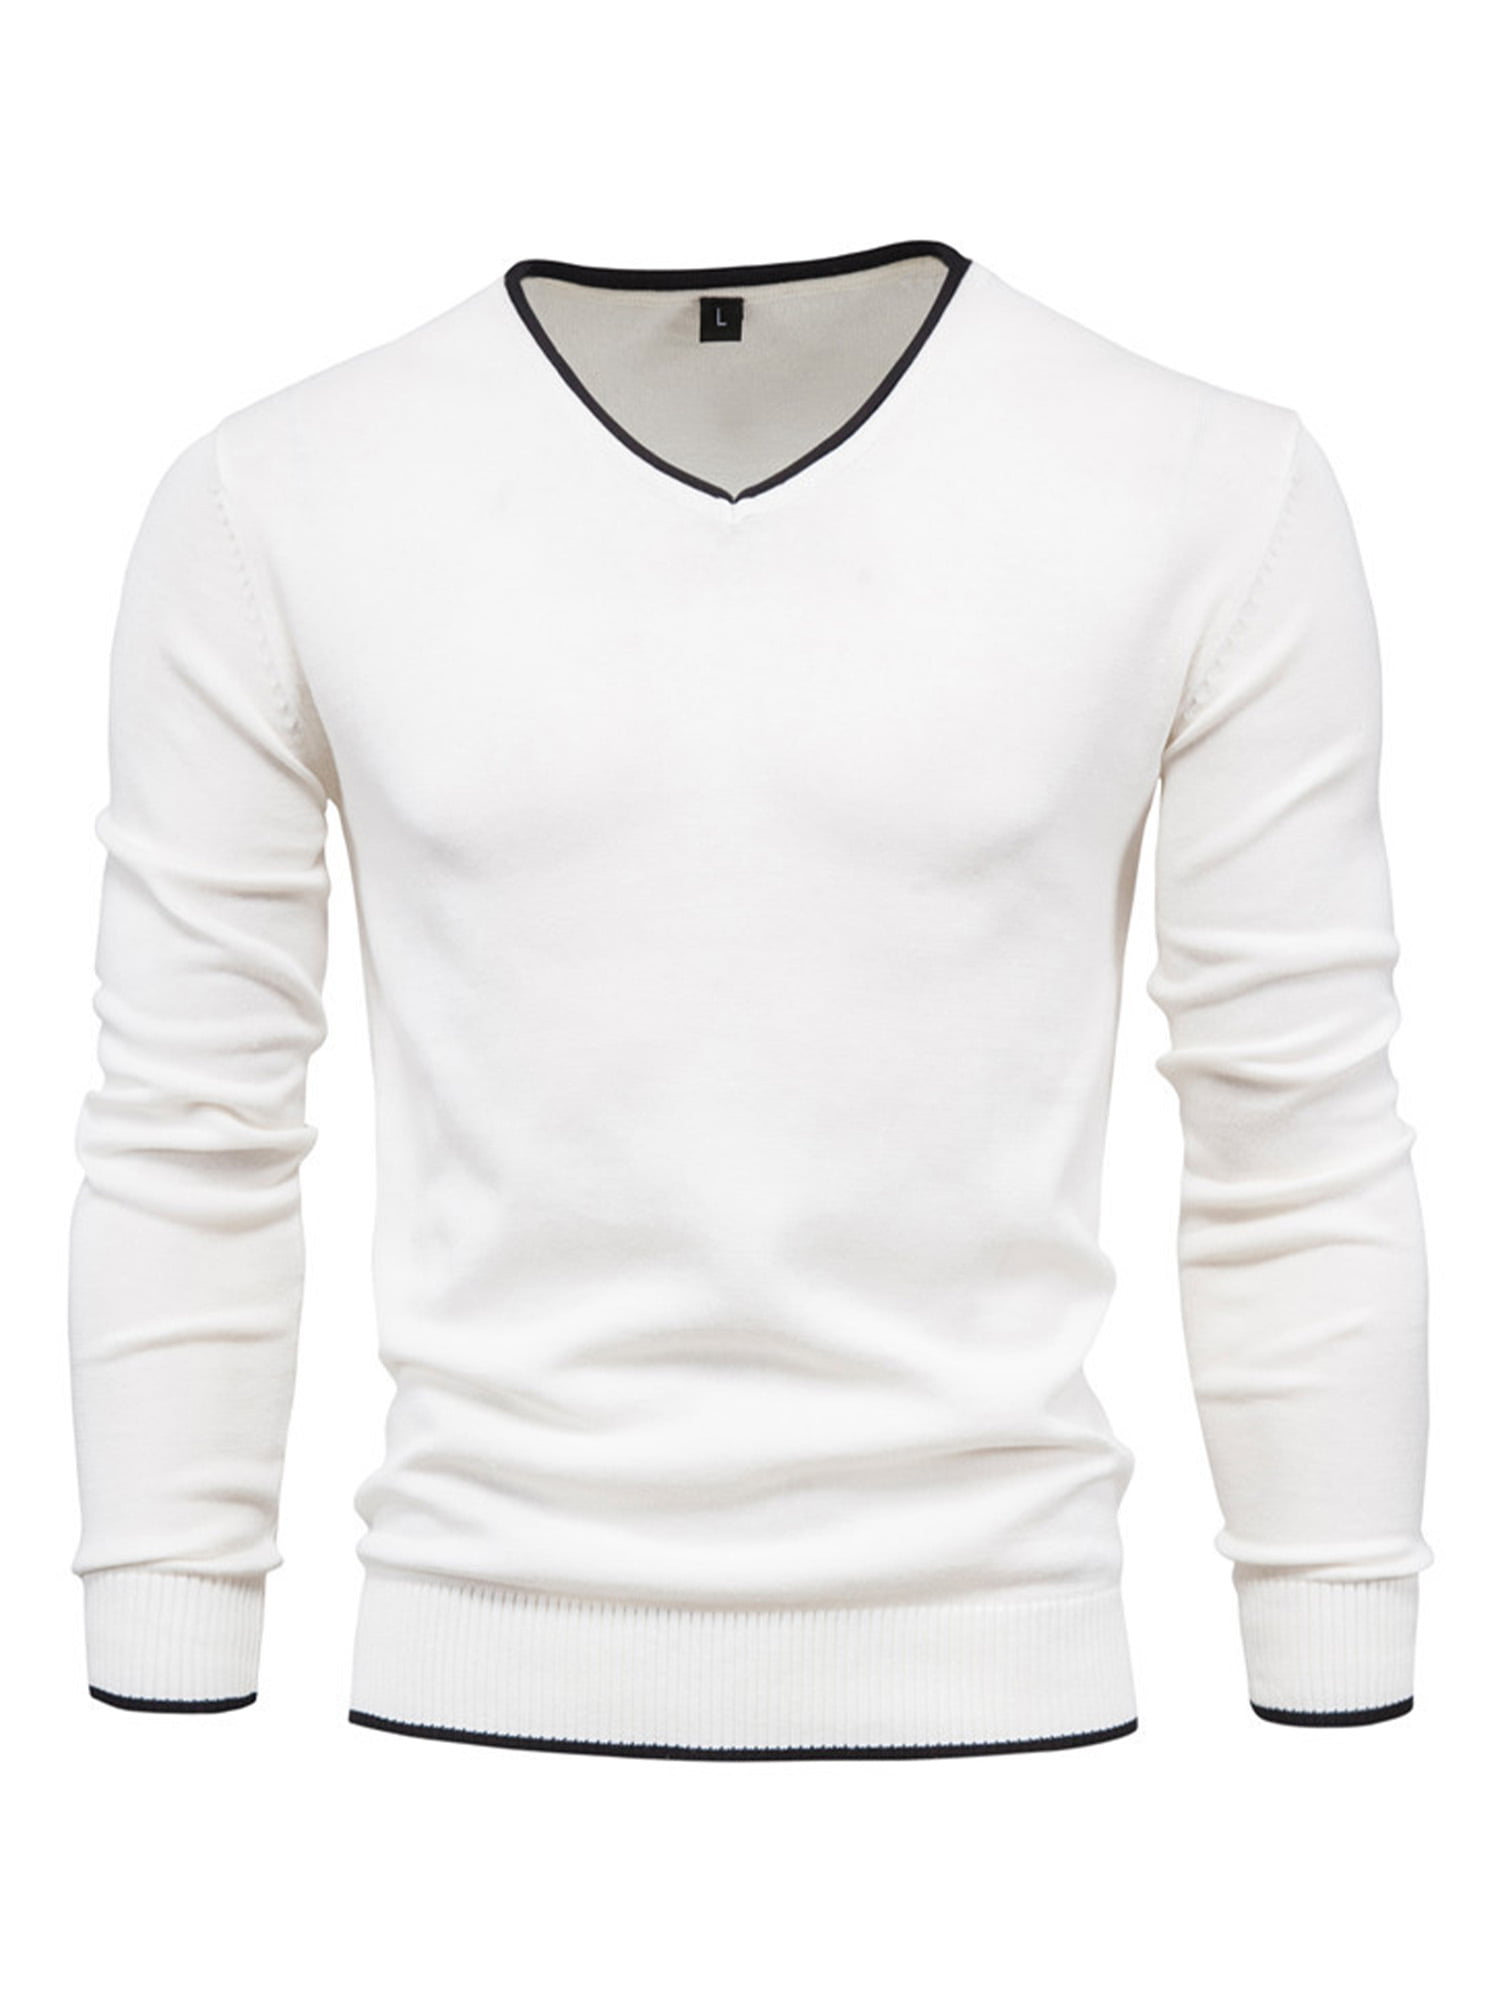 Tootu Mans Autumn Winter Casual V-Neck Mens Slim Sweaters Tops Blouse